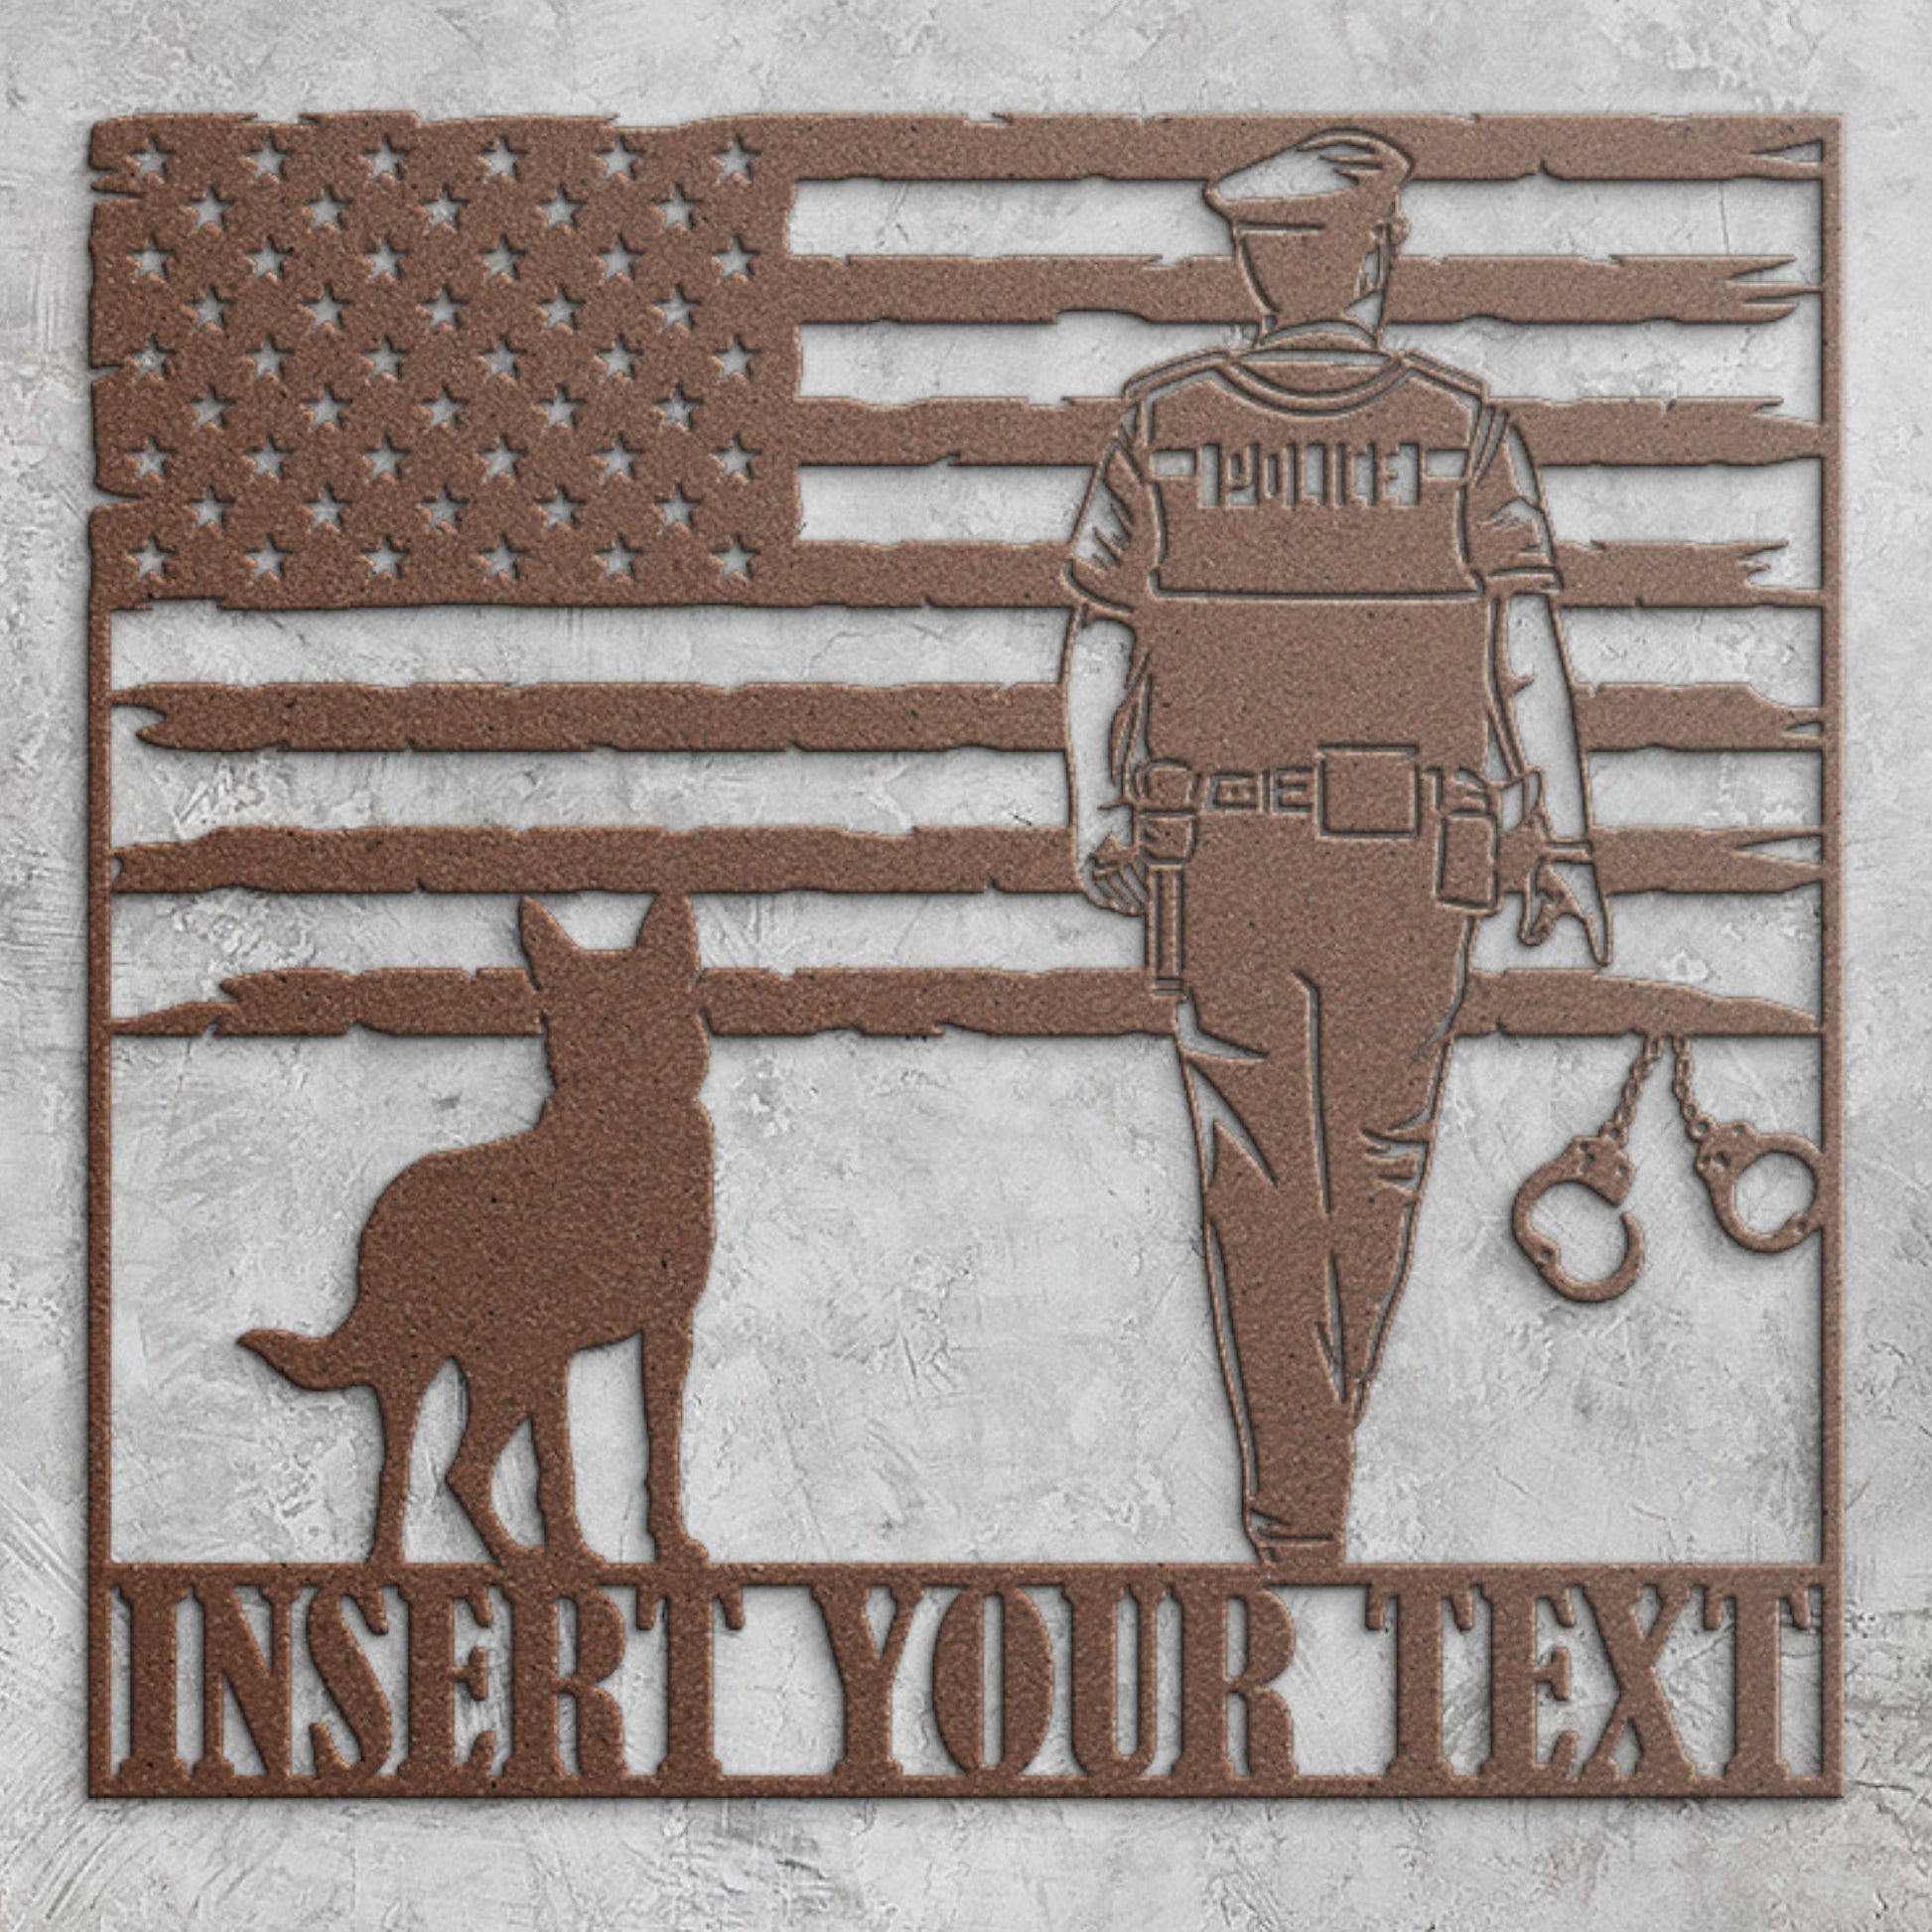 Personalized American Police Officer And K9 Dog Name Metal Sign. Custom Patriotic Police Force Wall Decor. US Police Officer Monogram Gift